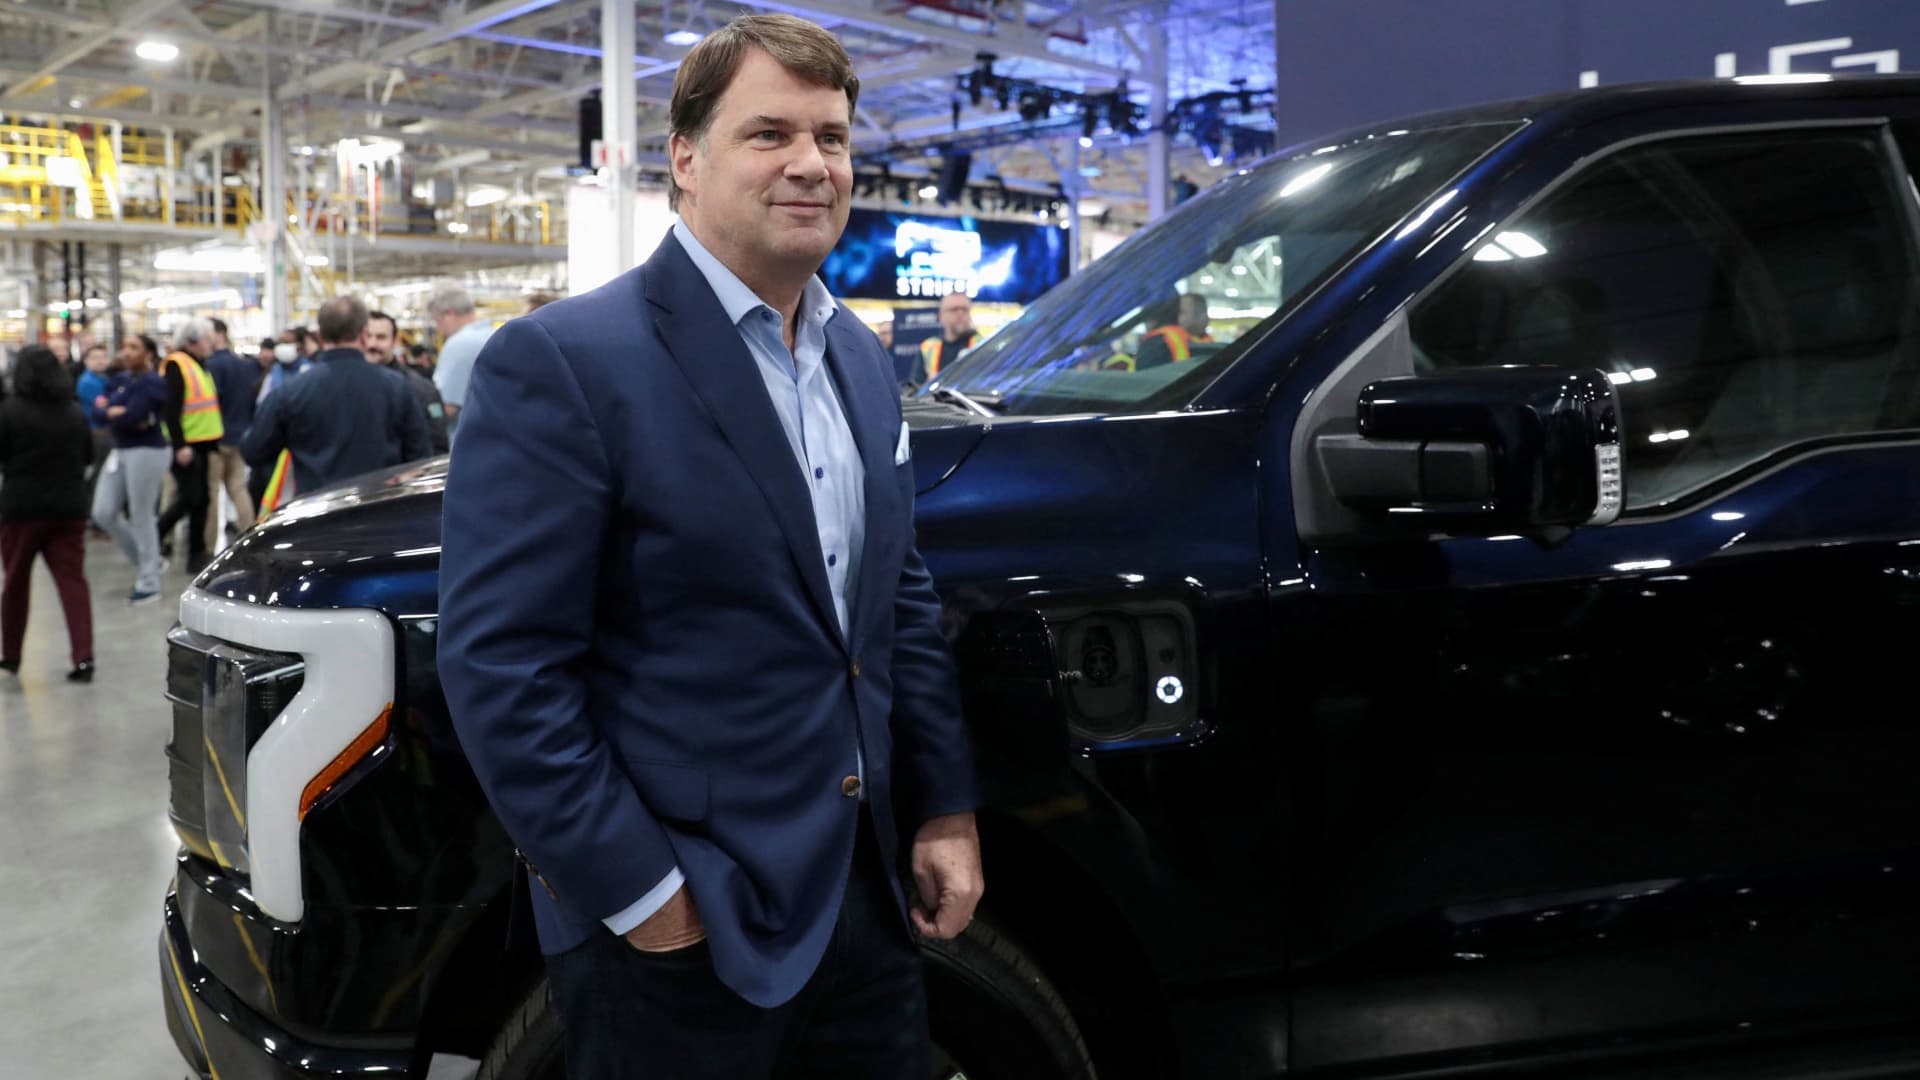 Ford CEO expects industry consolidation as electric-vehicle transition fuels costs